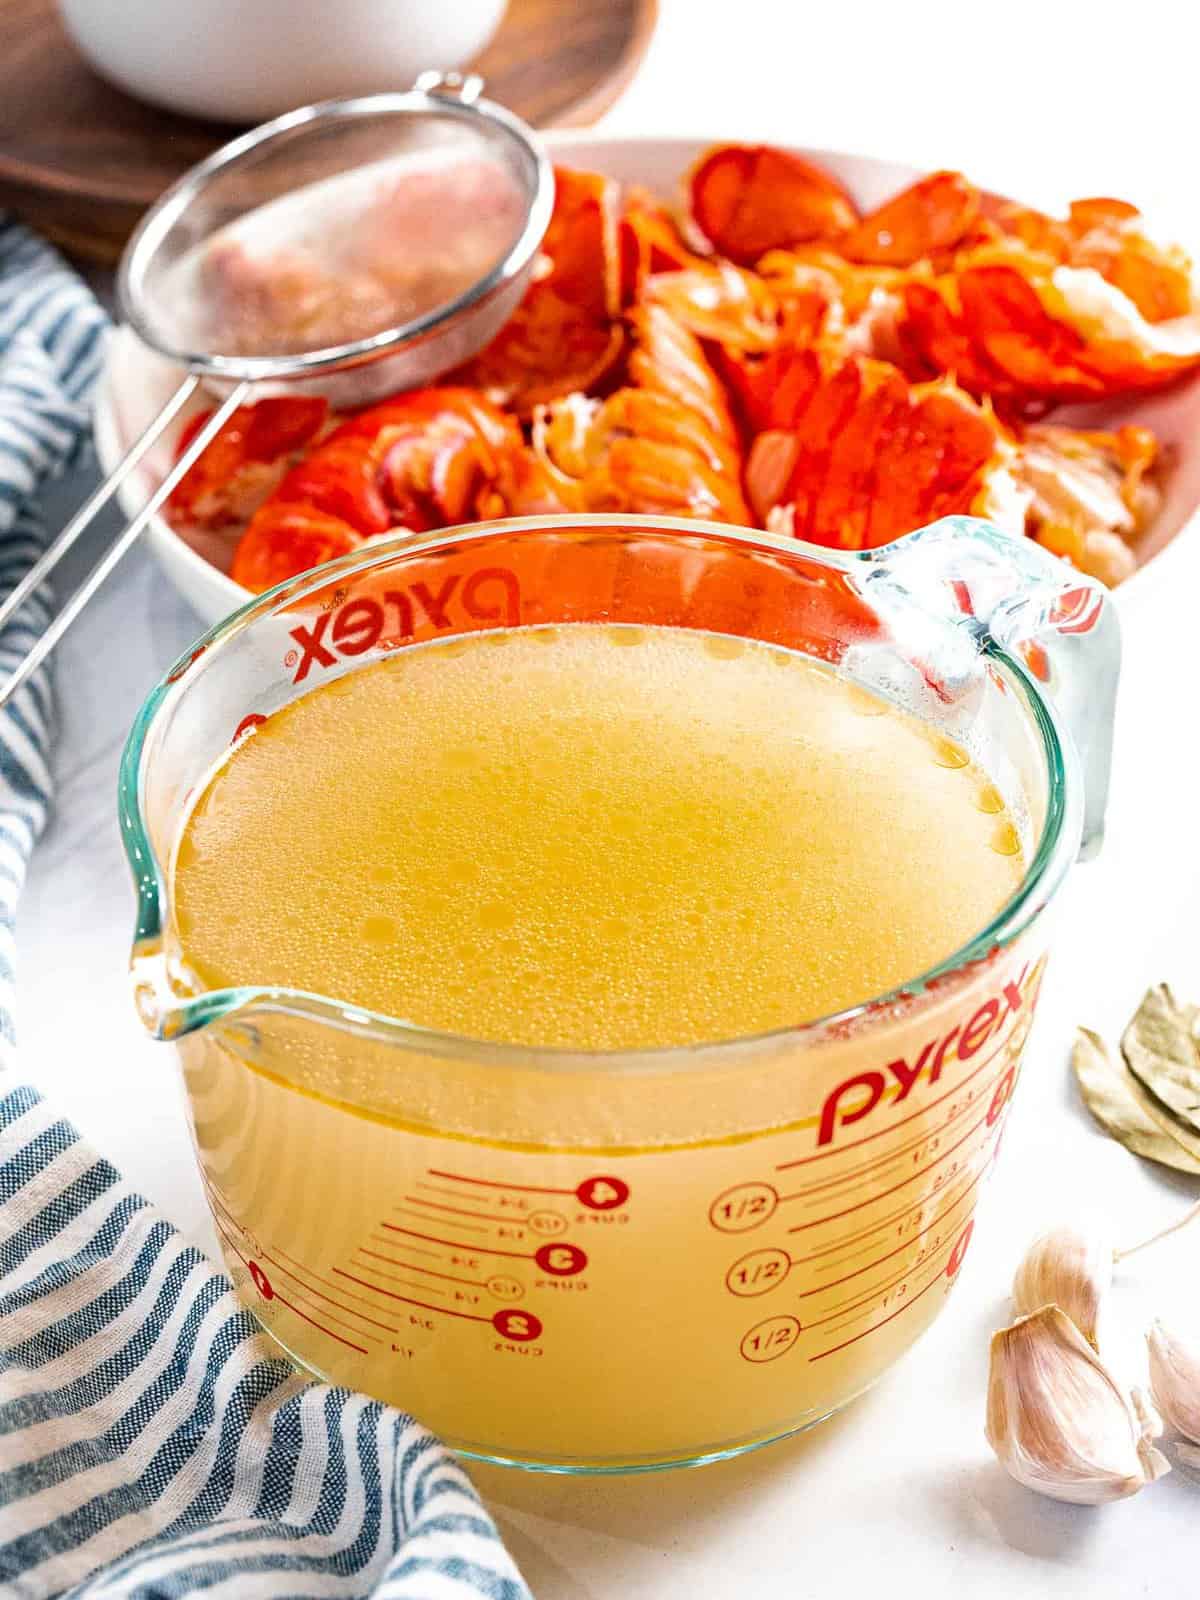 Lobster stock in a glass container in front of red lobster shells.